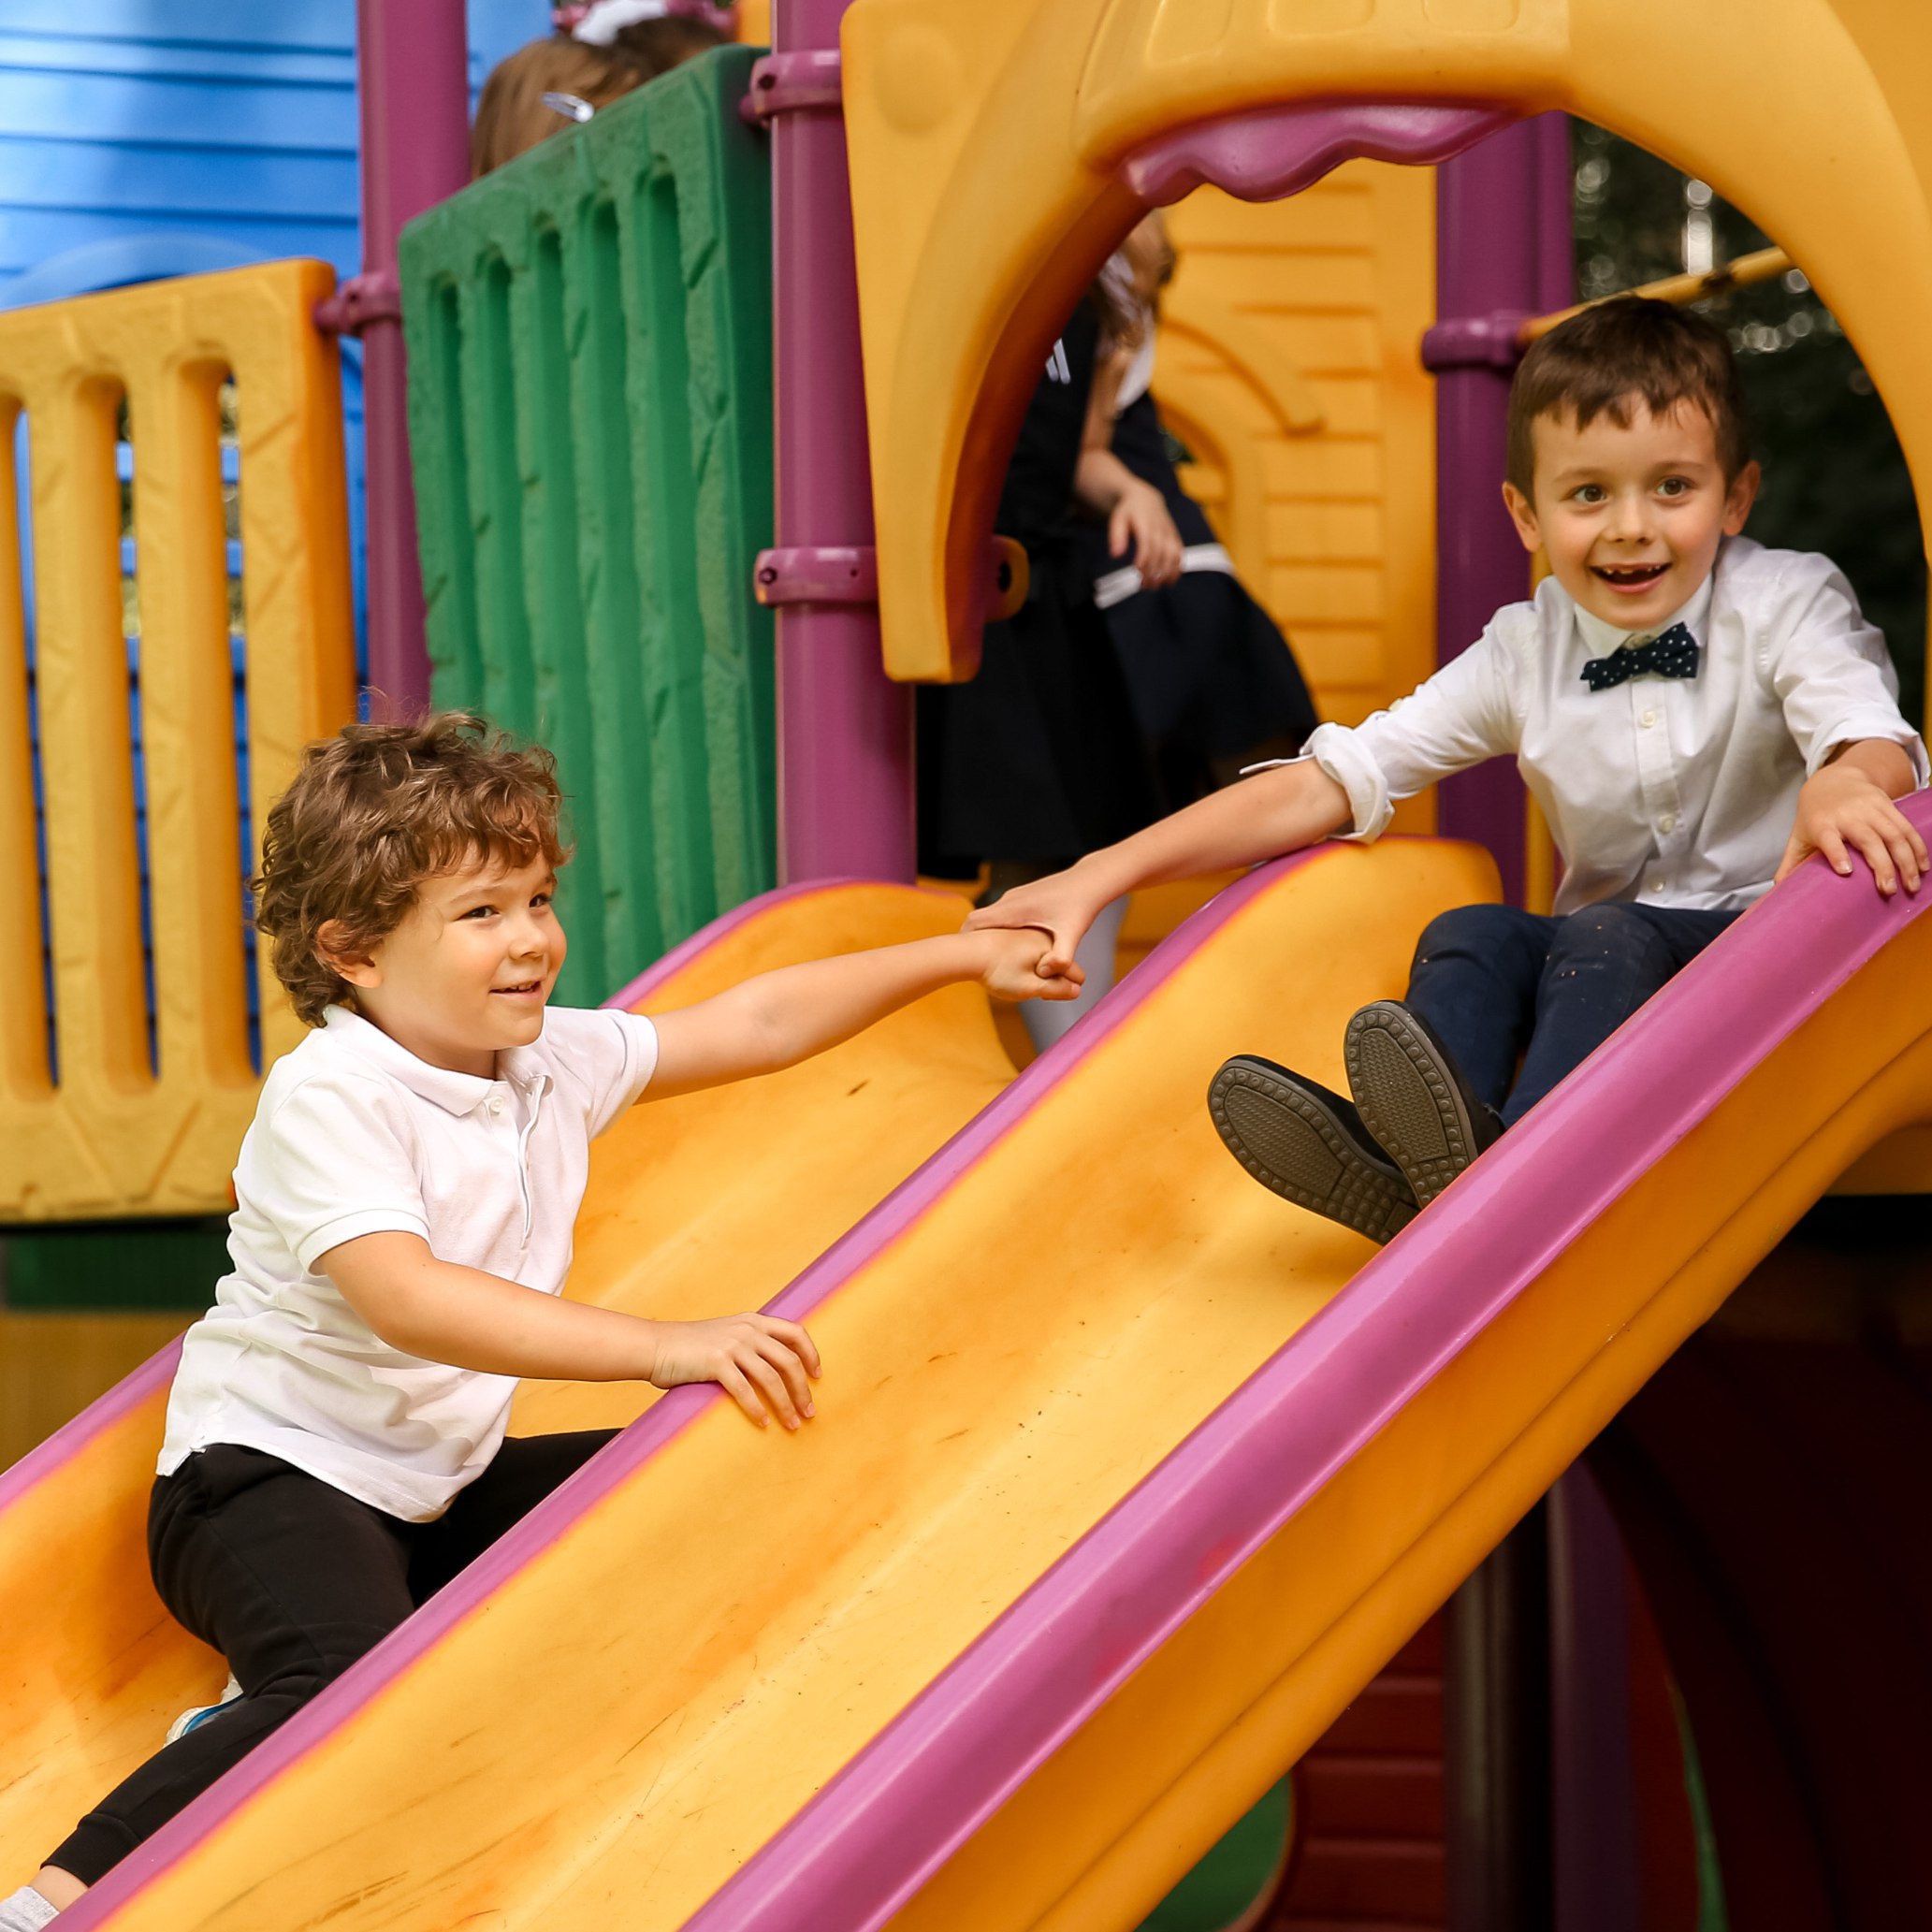 Additional admission to the Moscow campus for children from 2 to 6 years old